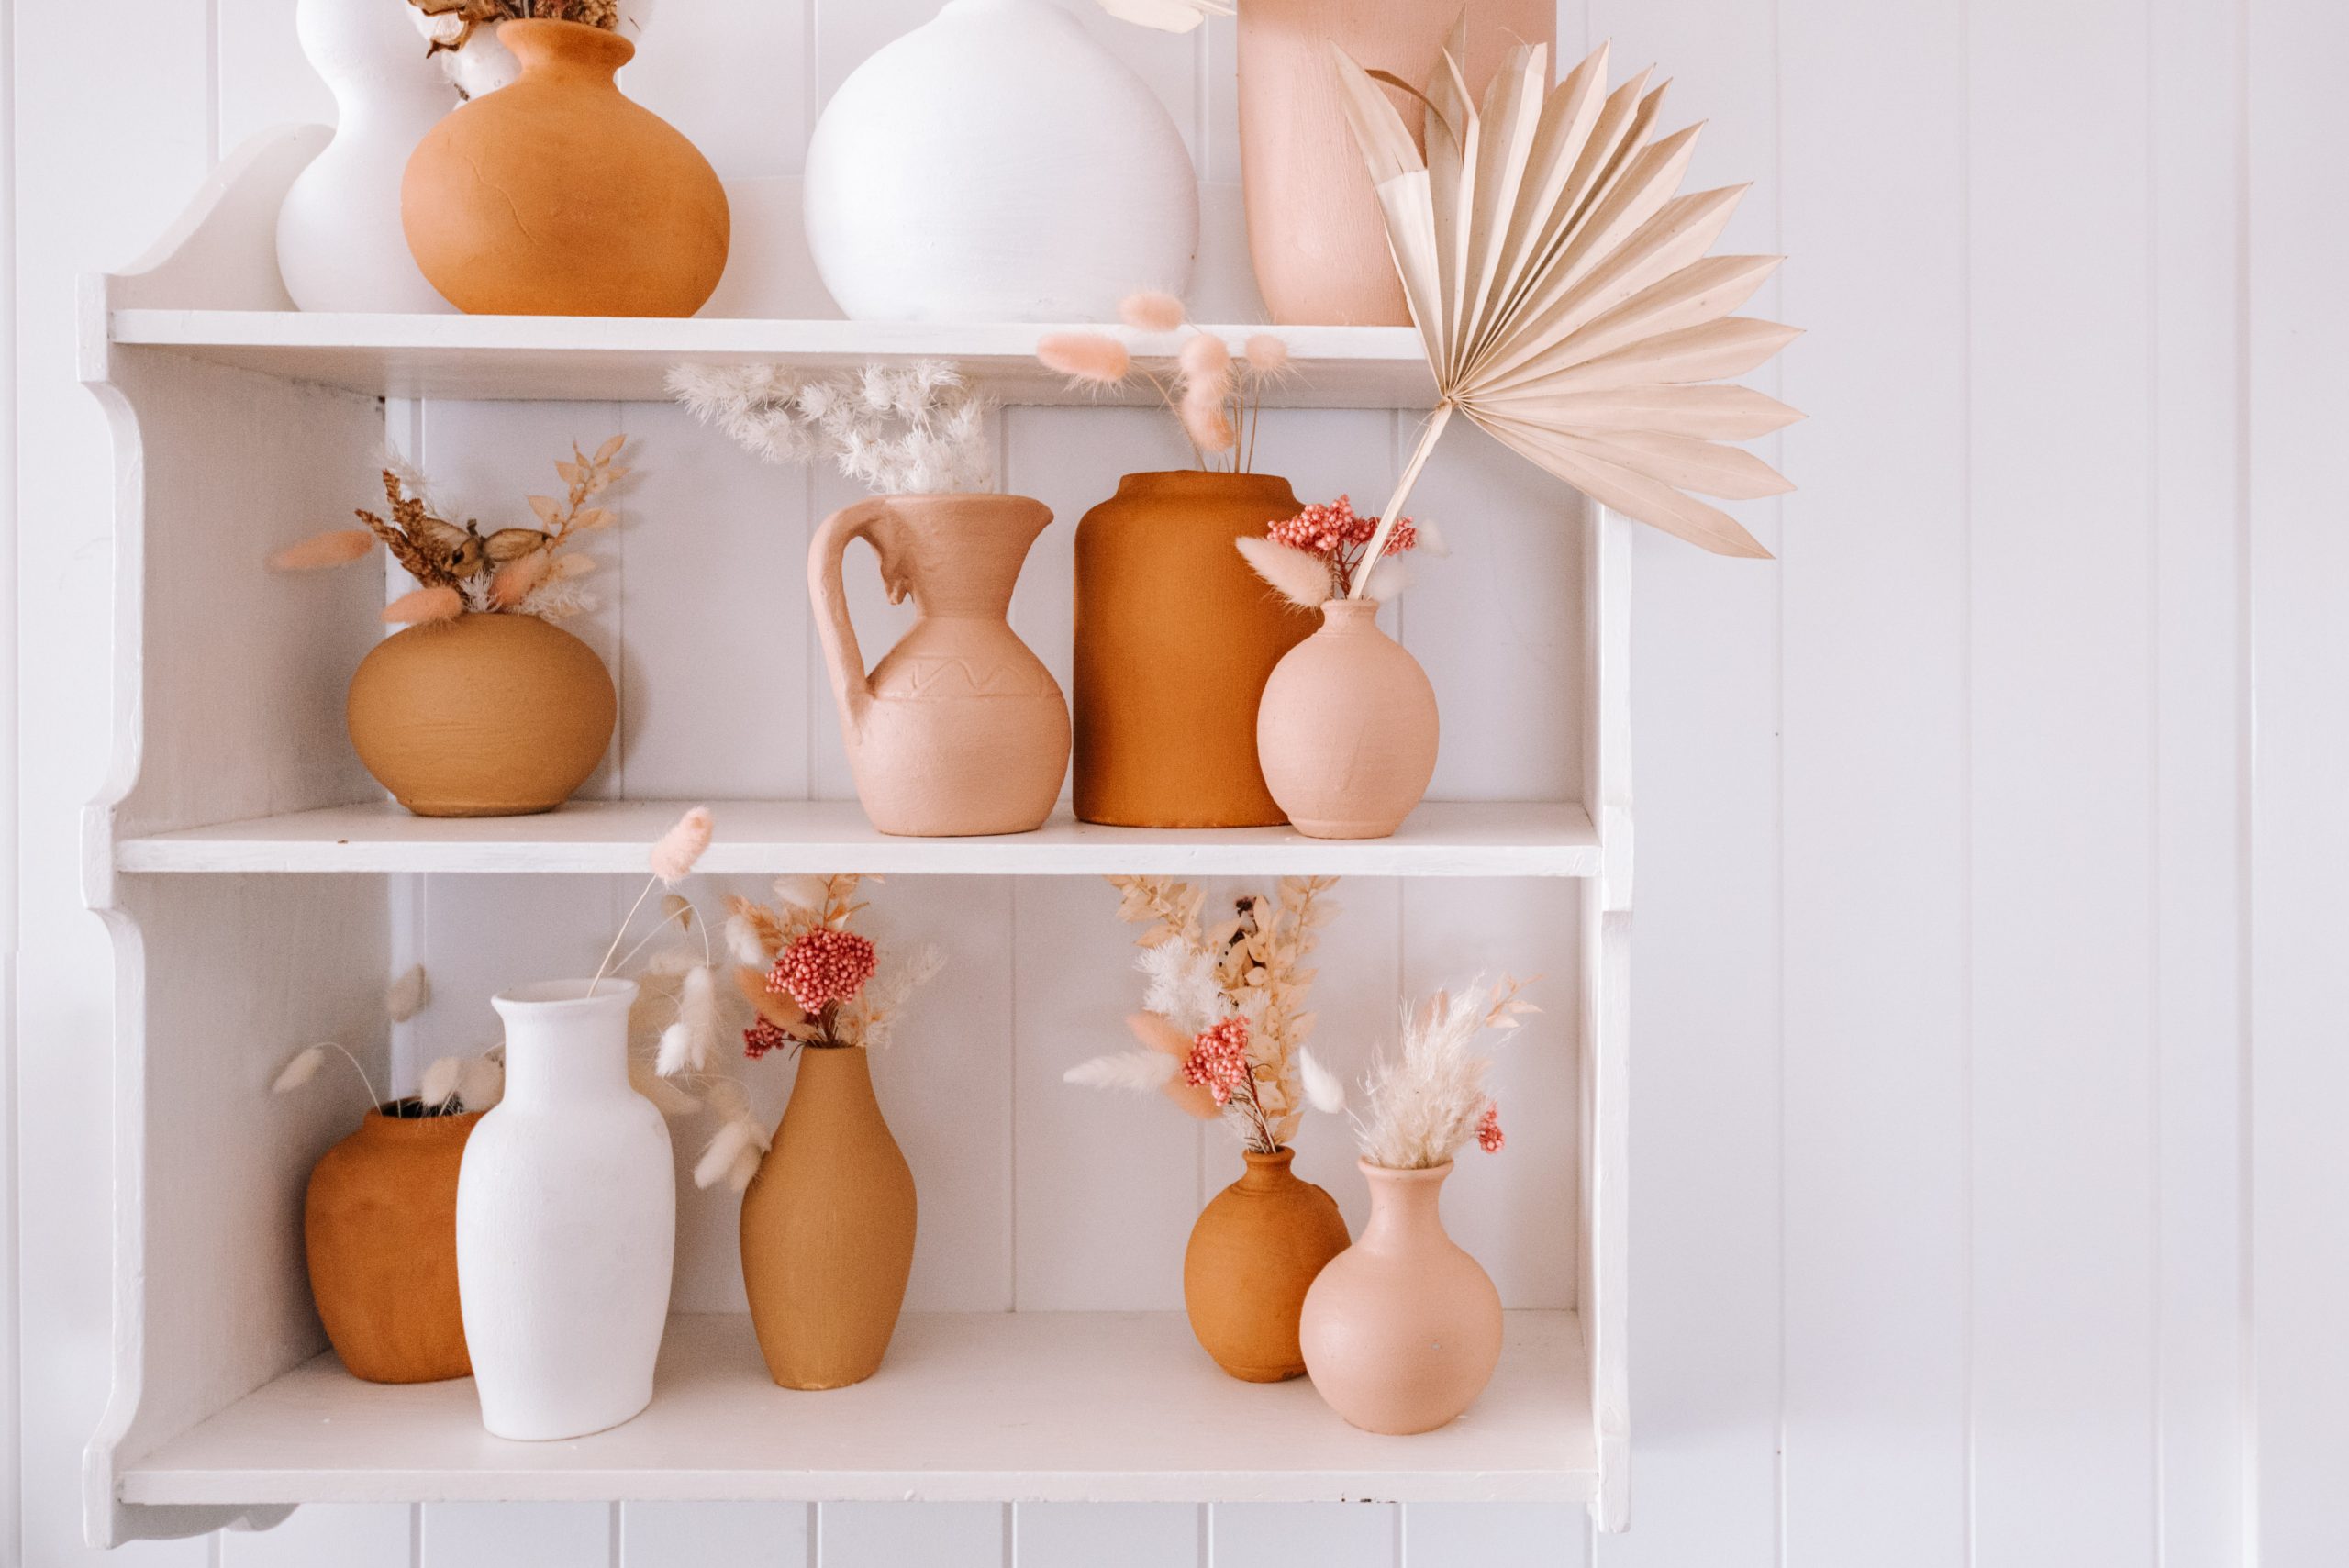 DIY: Making Clay Paint for your Home